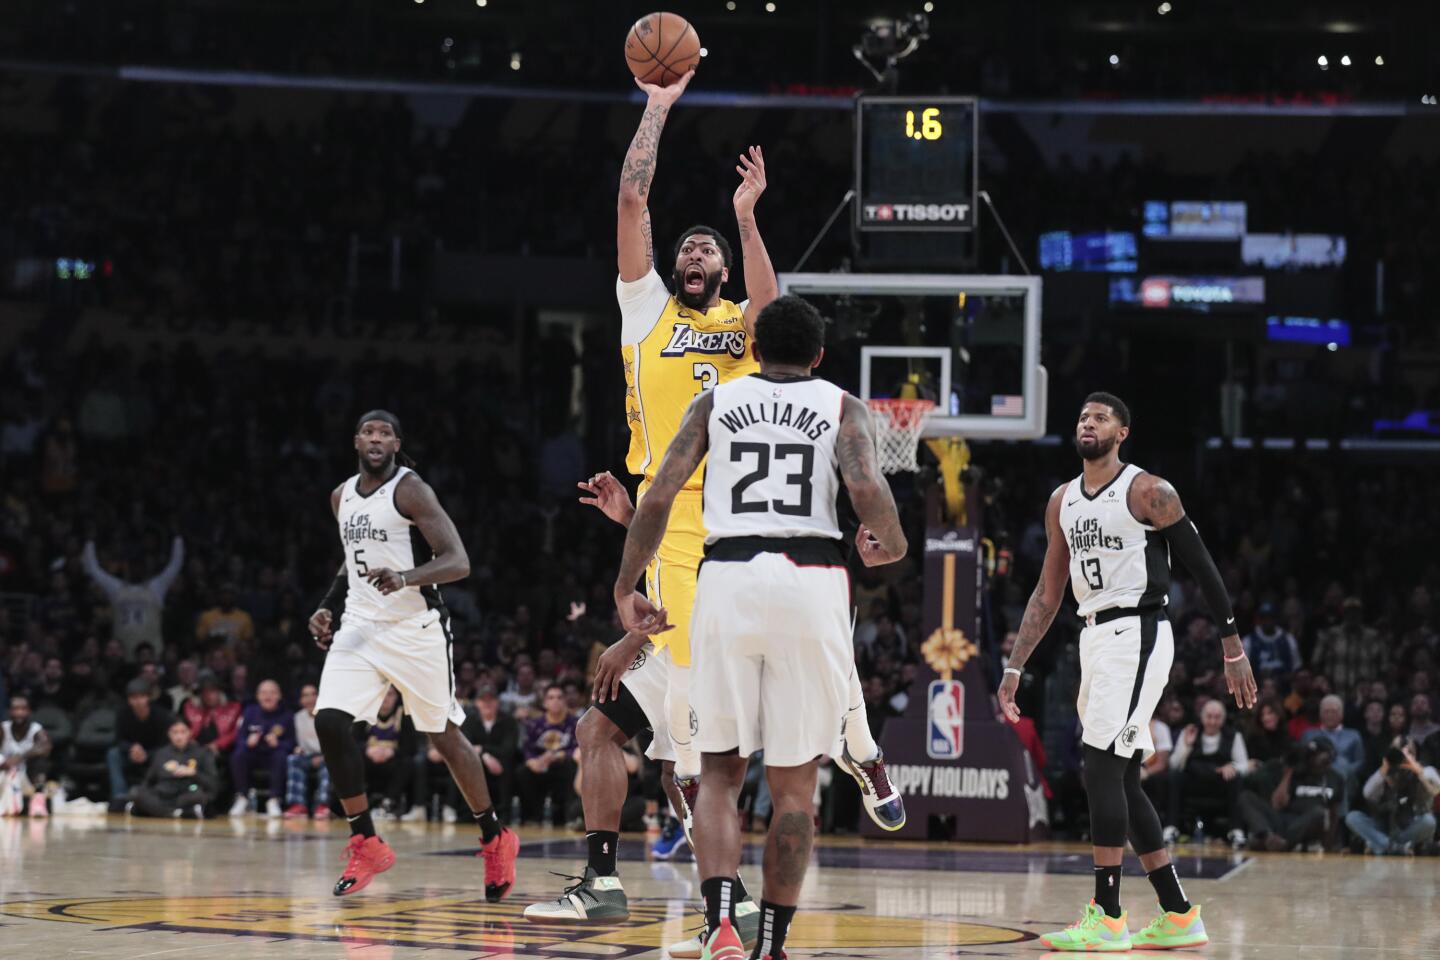 Lakers forward Anthony Davis attempts a three-point shot on the run to end the first half.